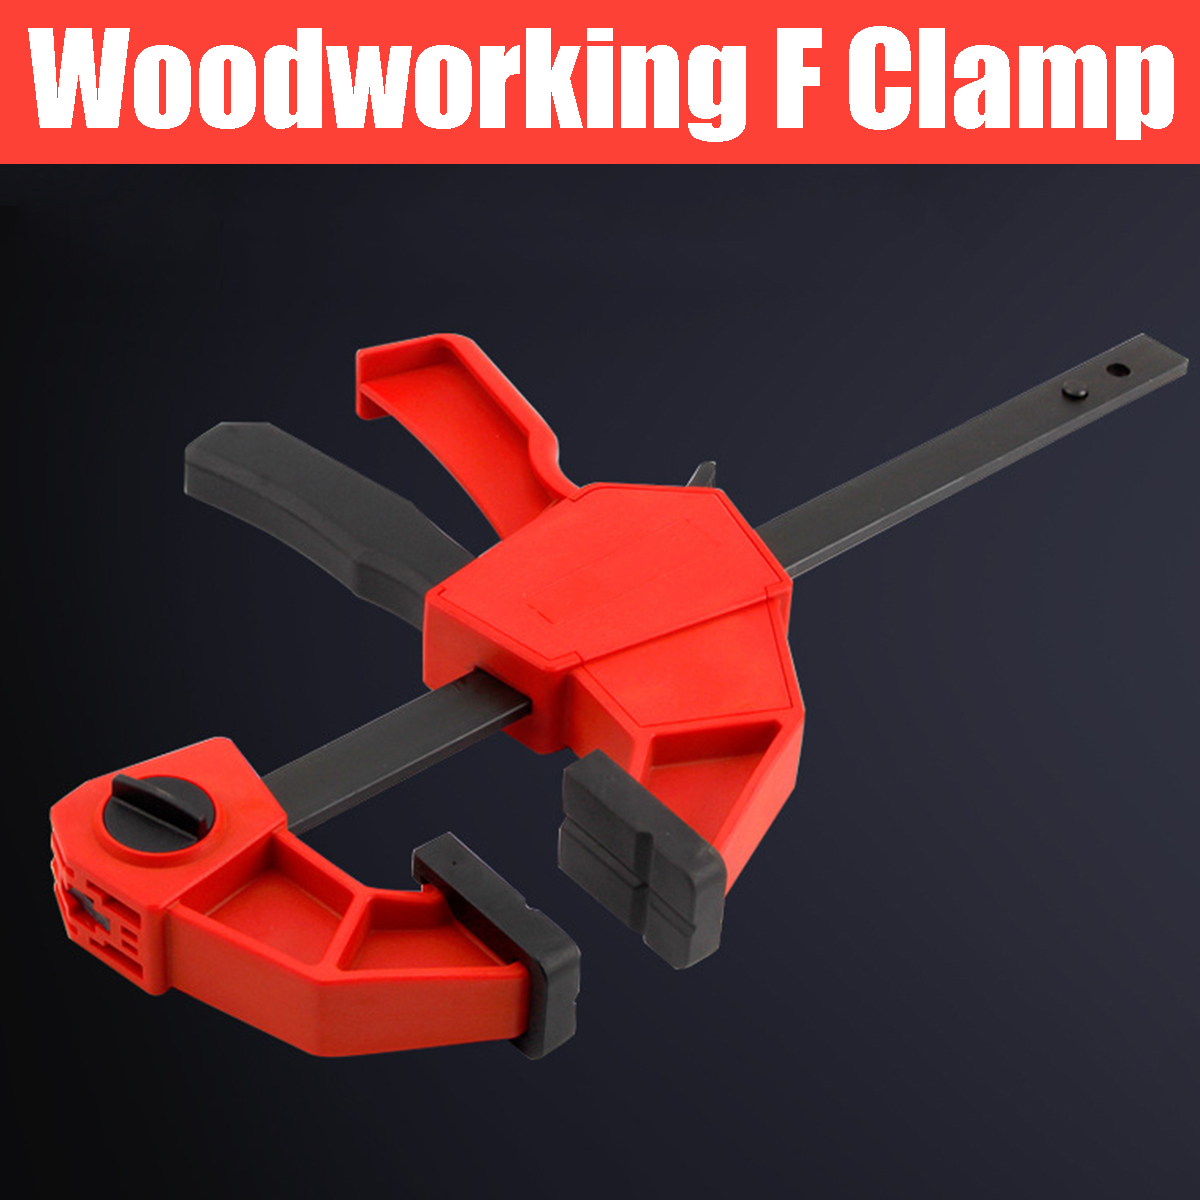 3036Inch-Heavy-Duty-F-Clamp-WoodWorking-Quick-Grip-Bar-Plastic-Grip-Wood-Clamp-1630185-4